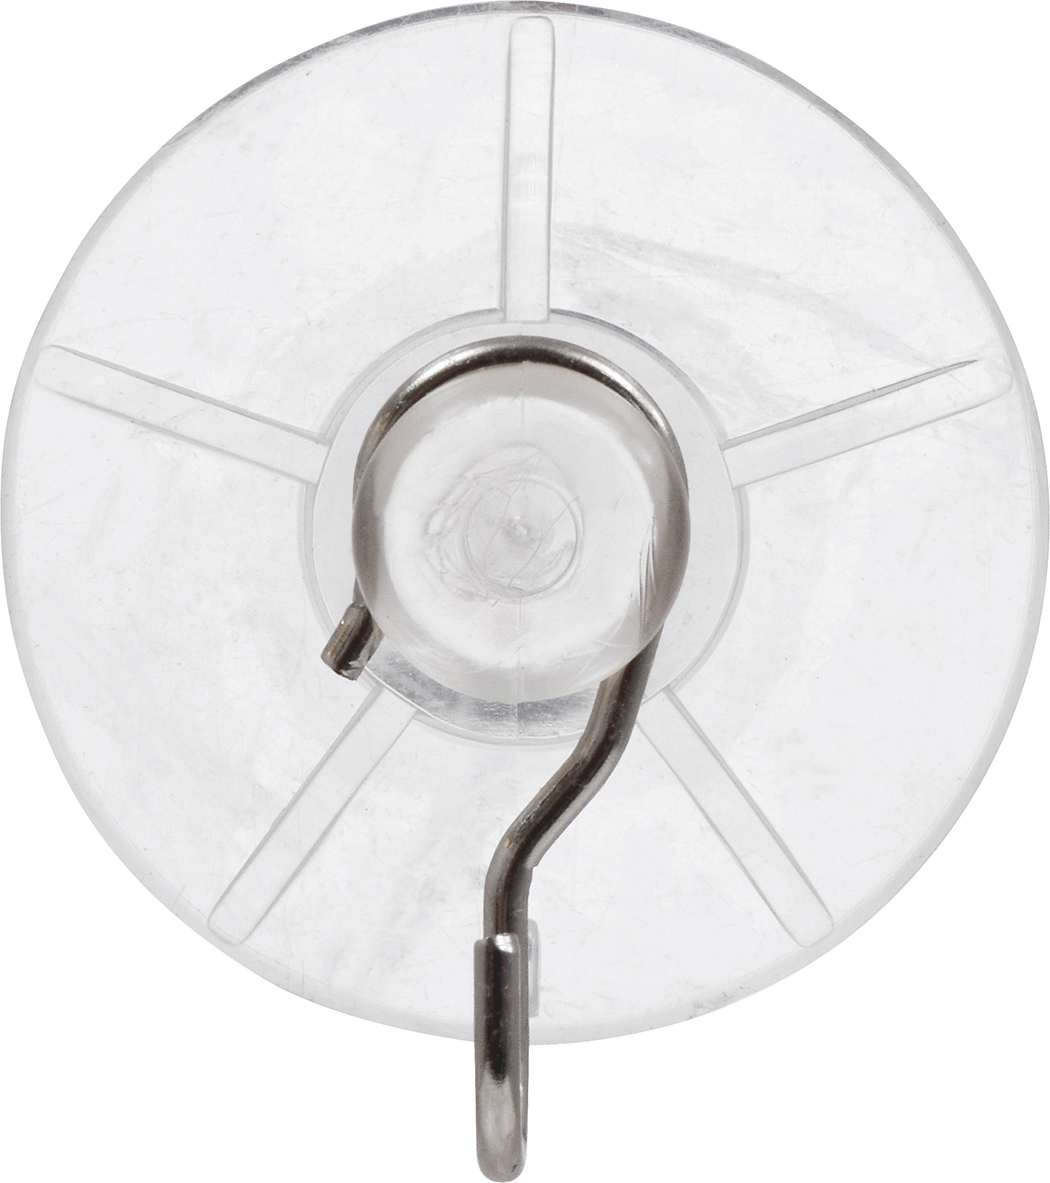 OOK Large Suction Cup Hook 3 Pack, Plastic, Clear - image 4 of 8